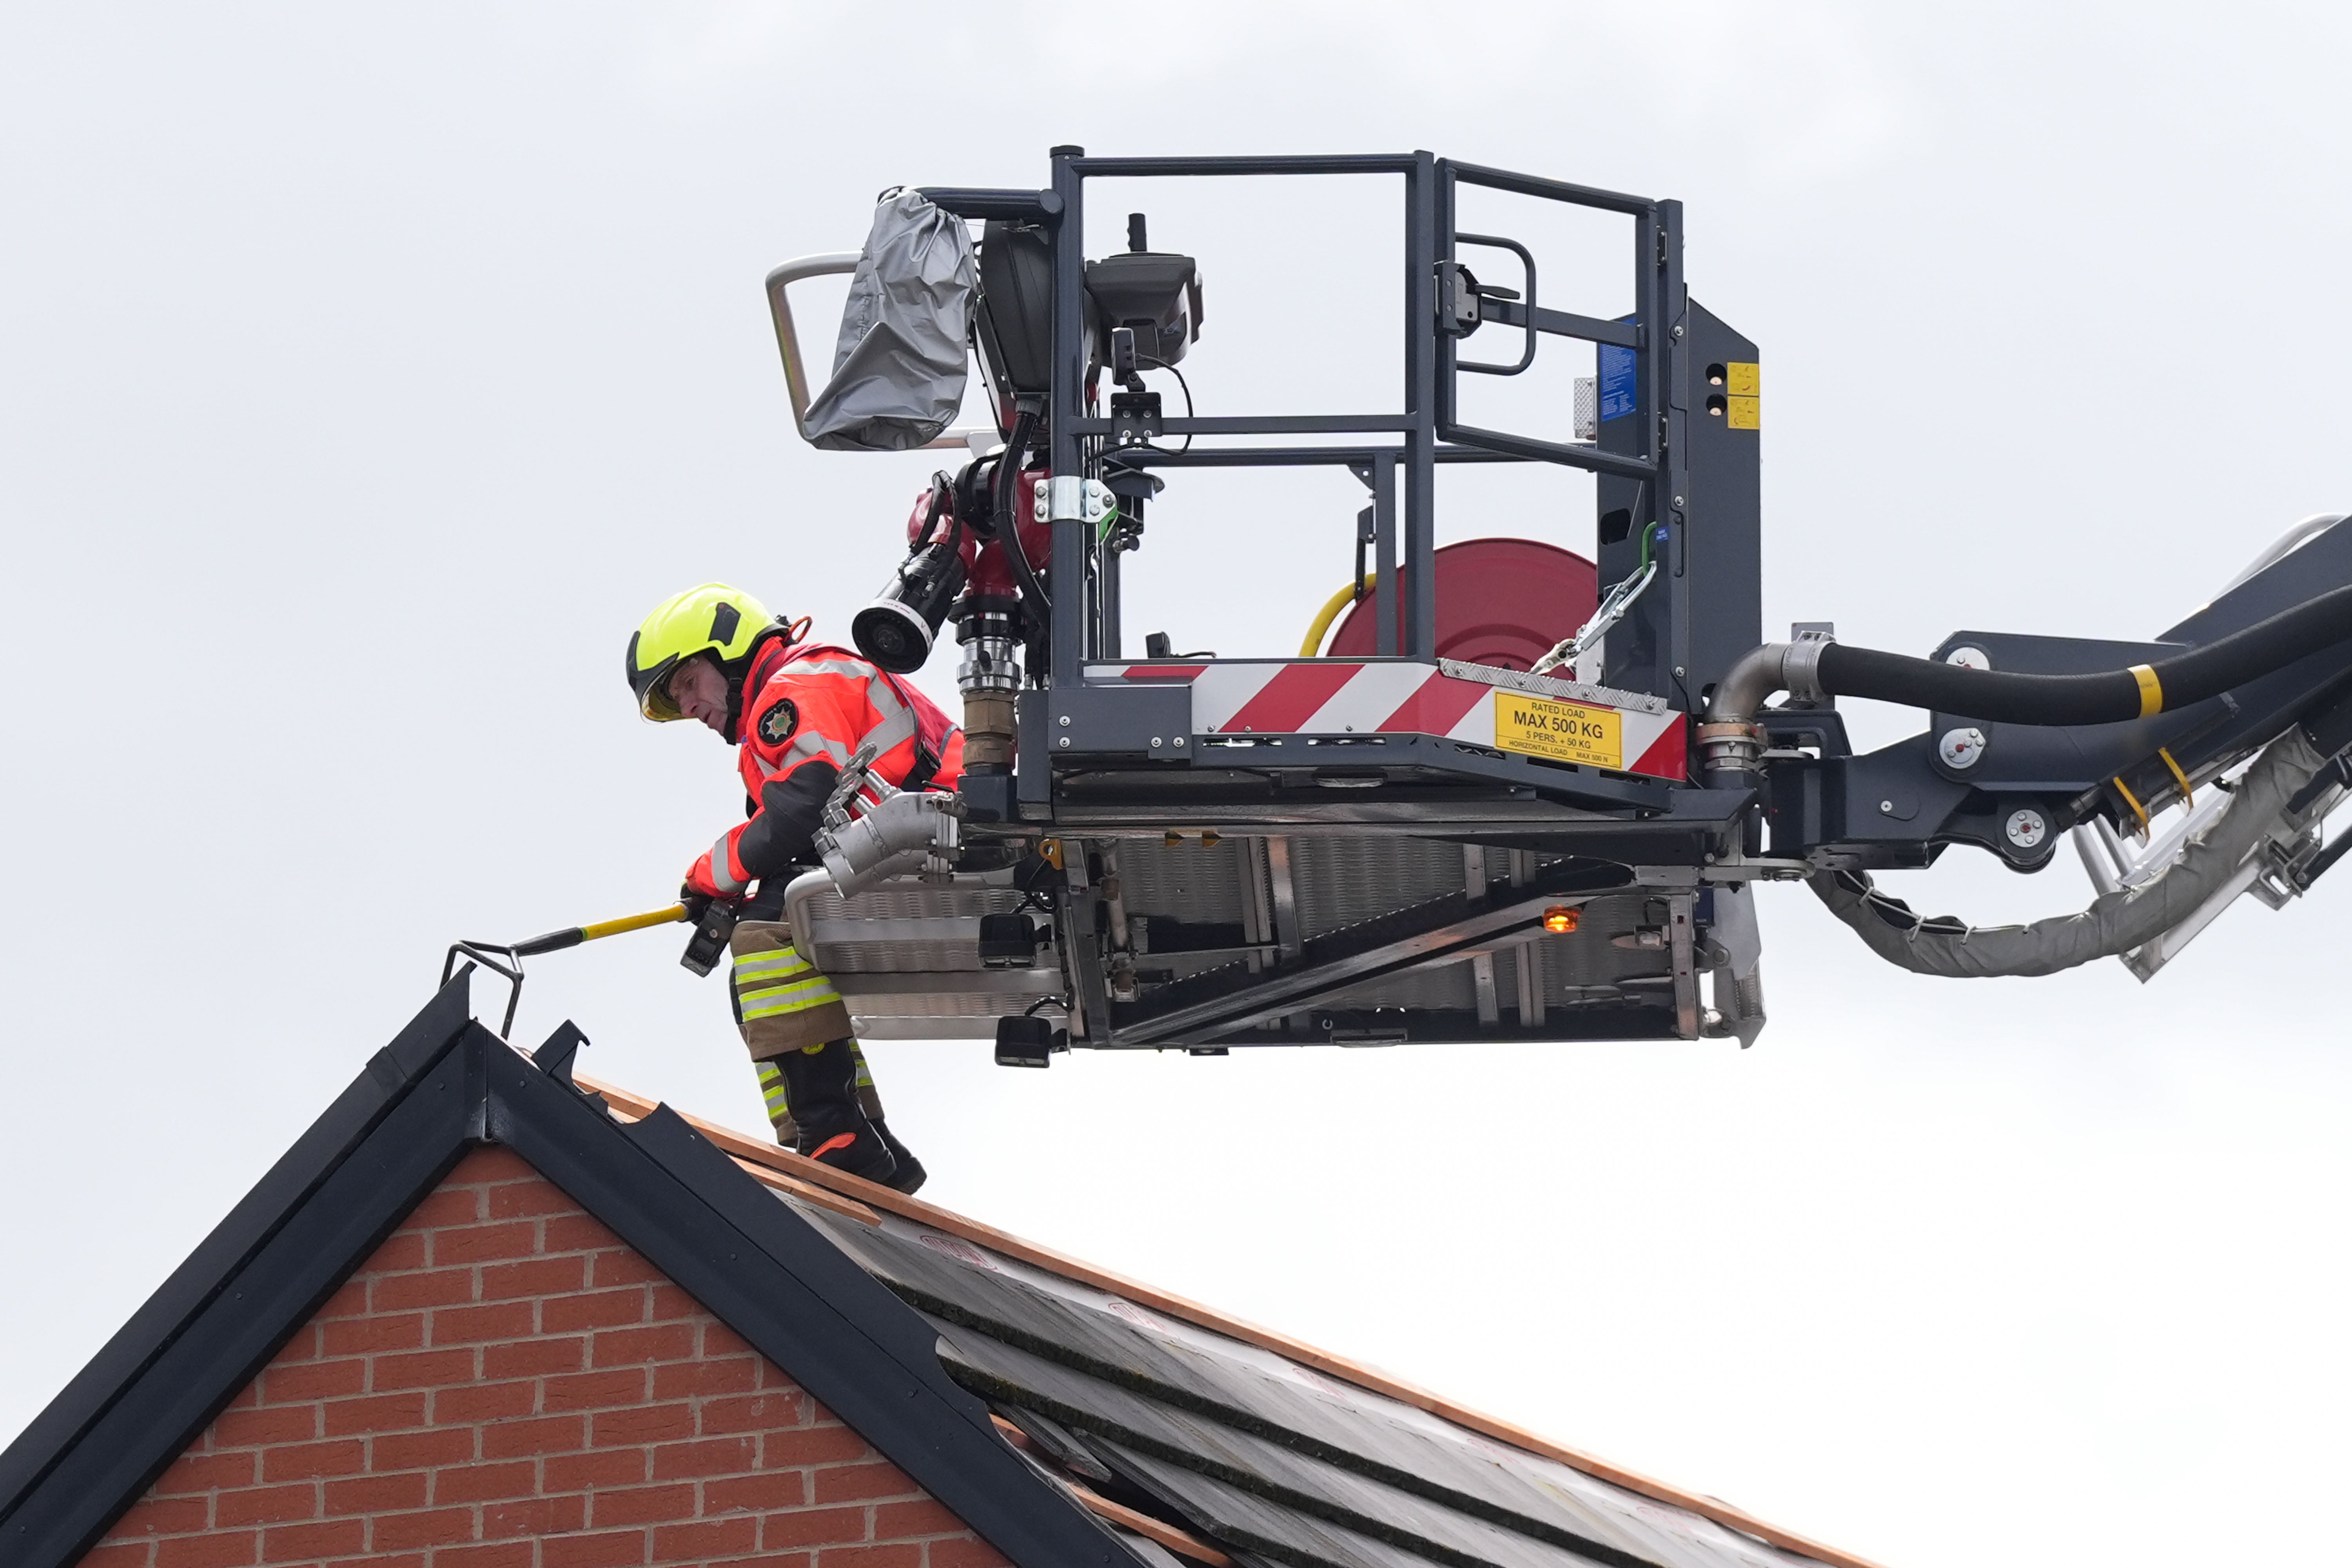 Emergency service workers inspect the roof a property in Knutton, North Staffordshire